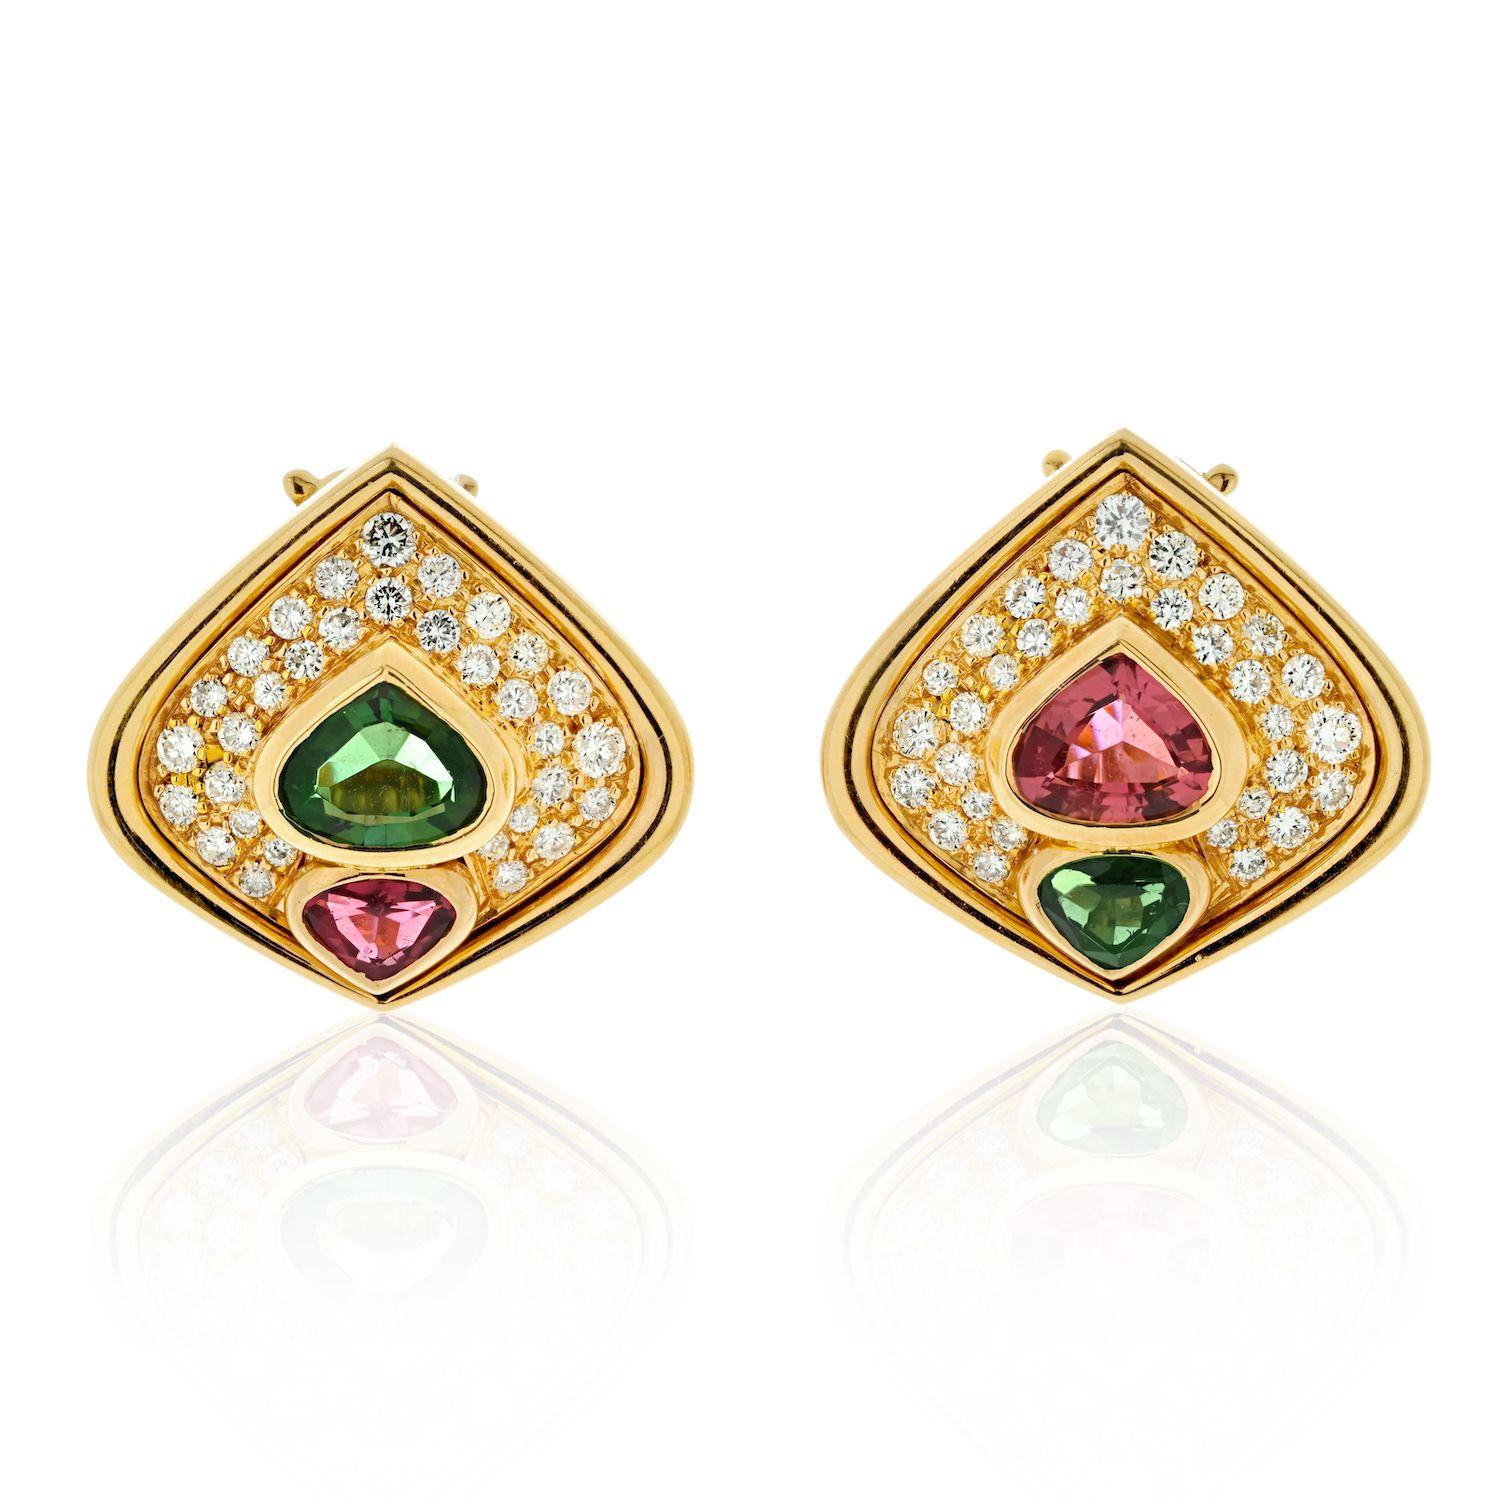 Pair of Marina B earrings housed in pave diamond set, 18k yellow gold settings, featuring green and pink tourmalines.
The earrings take a striking, glamorous look that nevertheless speak heavily of Marina B classics.
Approx. carat weight